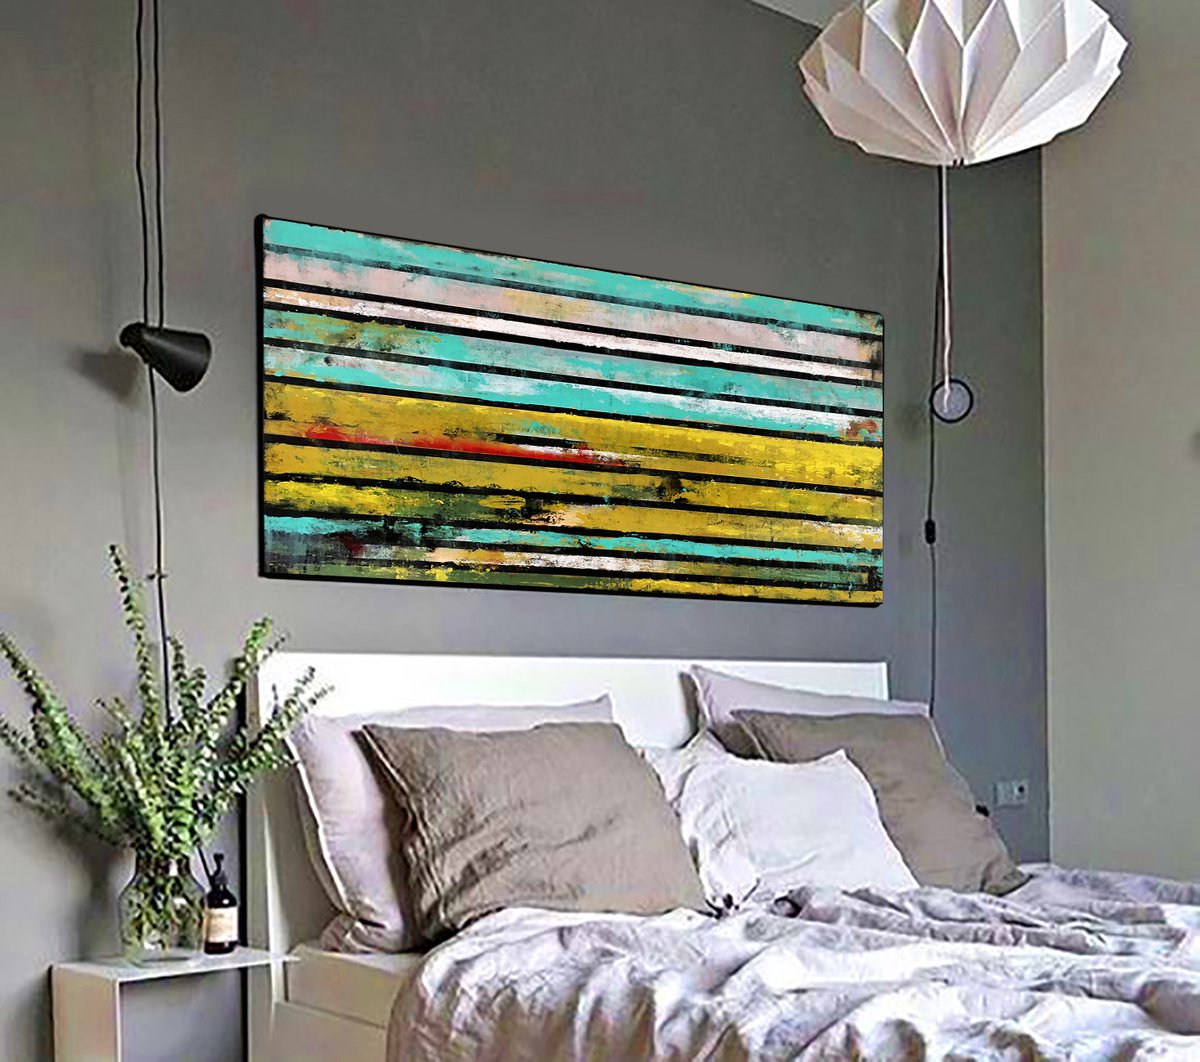 Stripe 9 48x24 Abstract Painting on Canvas by Bo Kravchenko